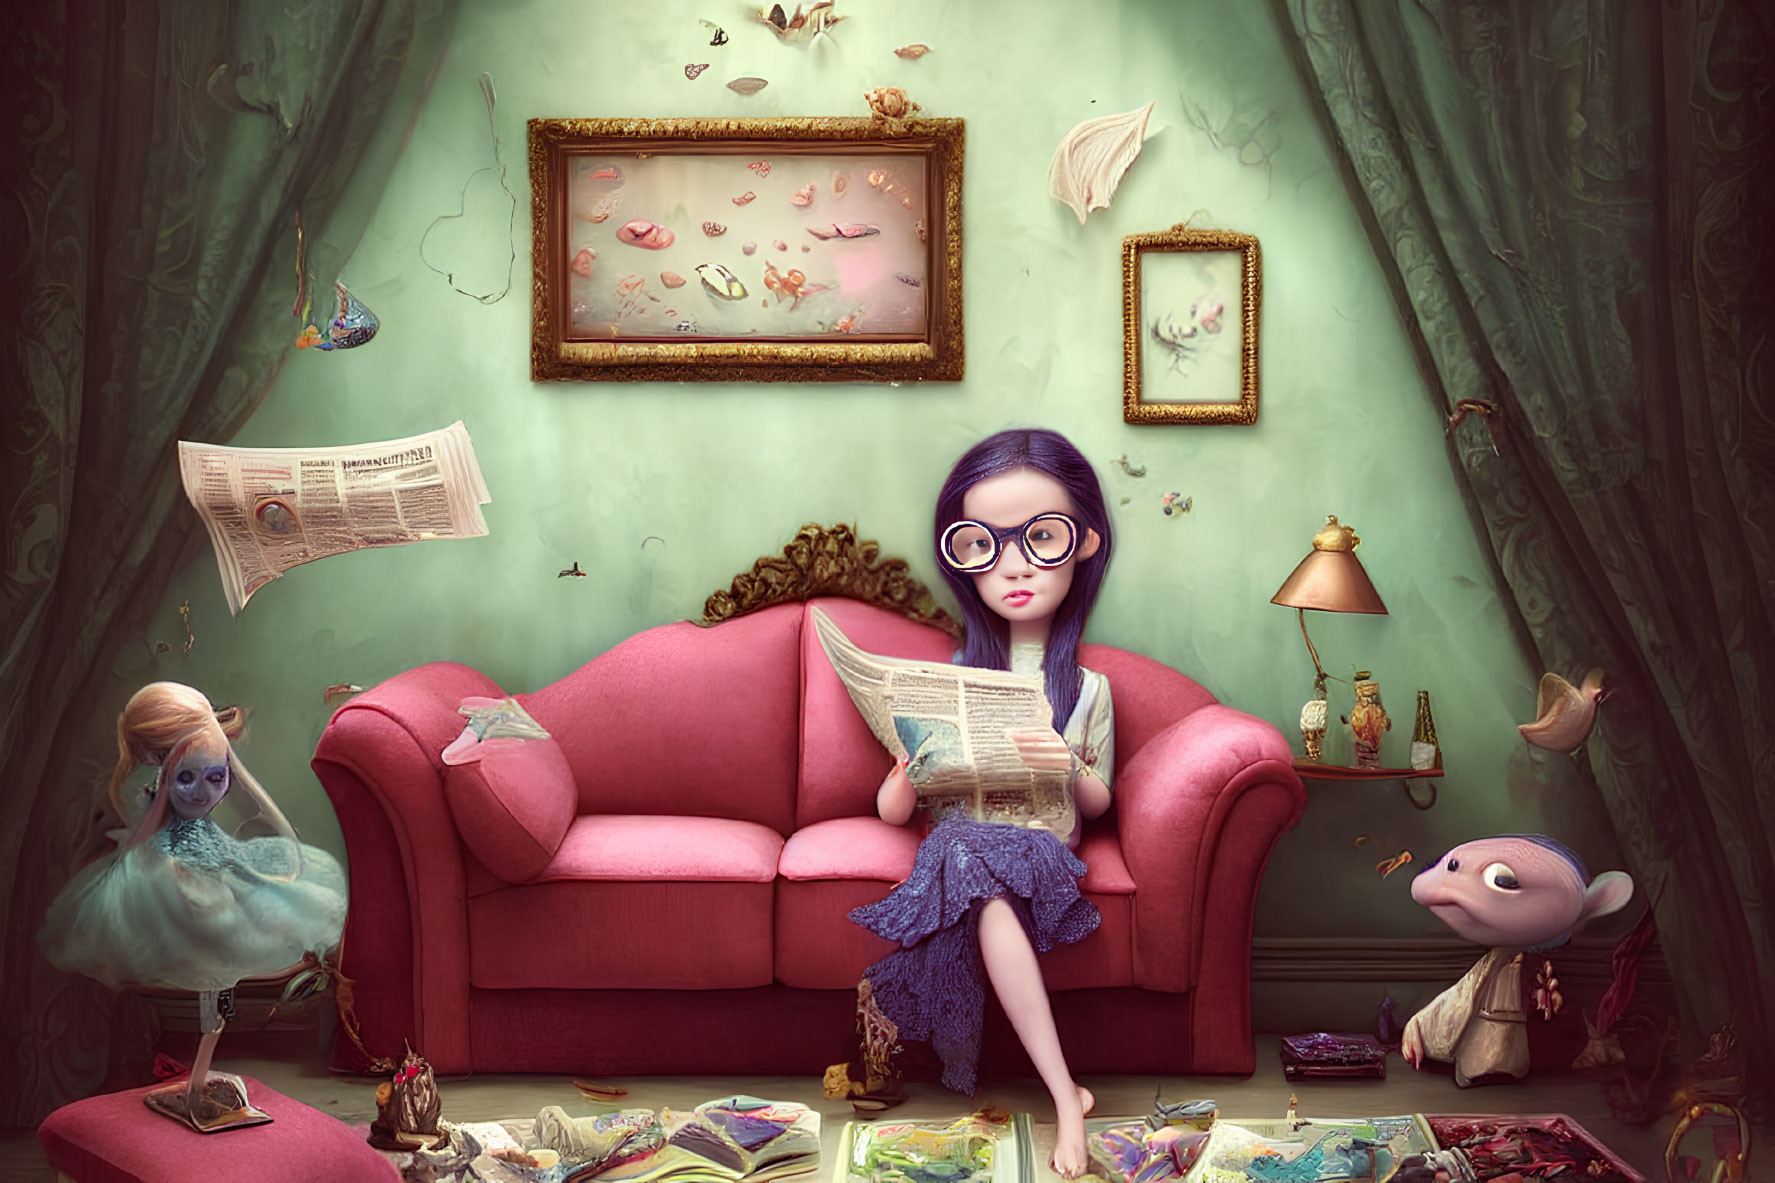 Whimsical room with floating objects and girl reading on pink couch